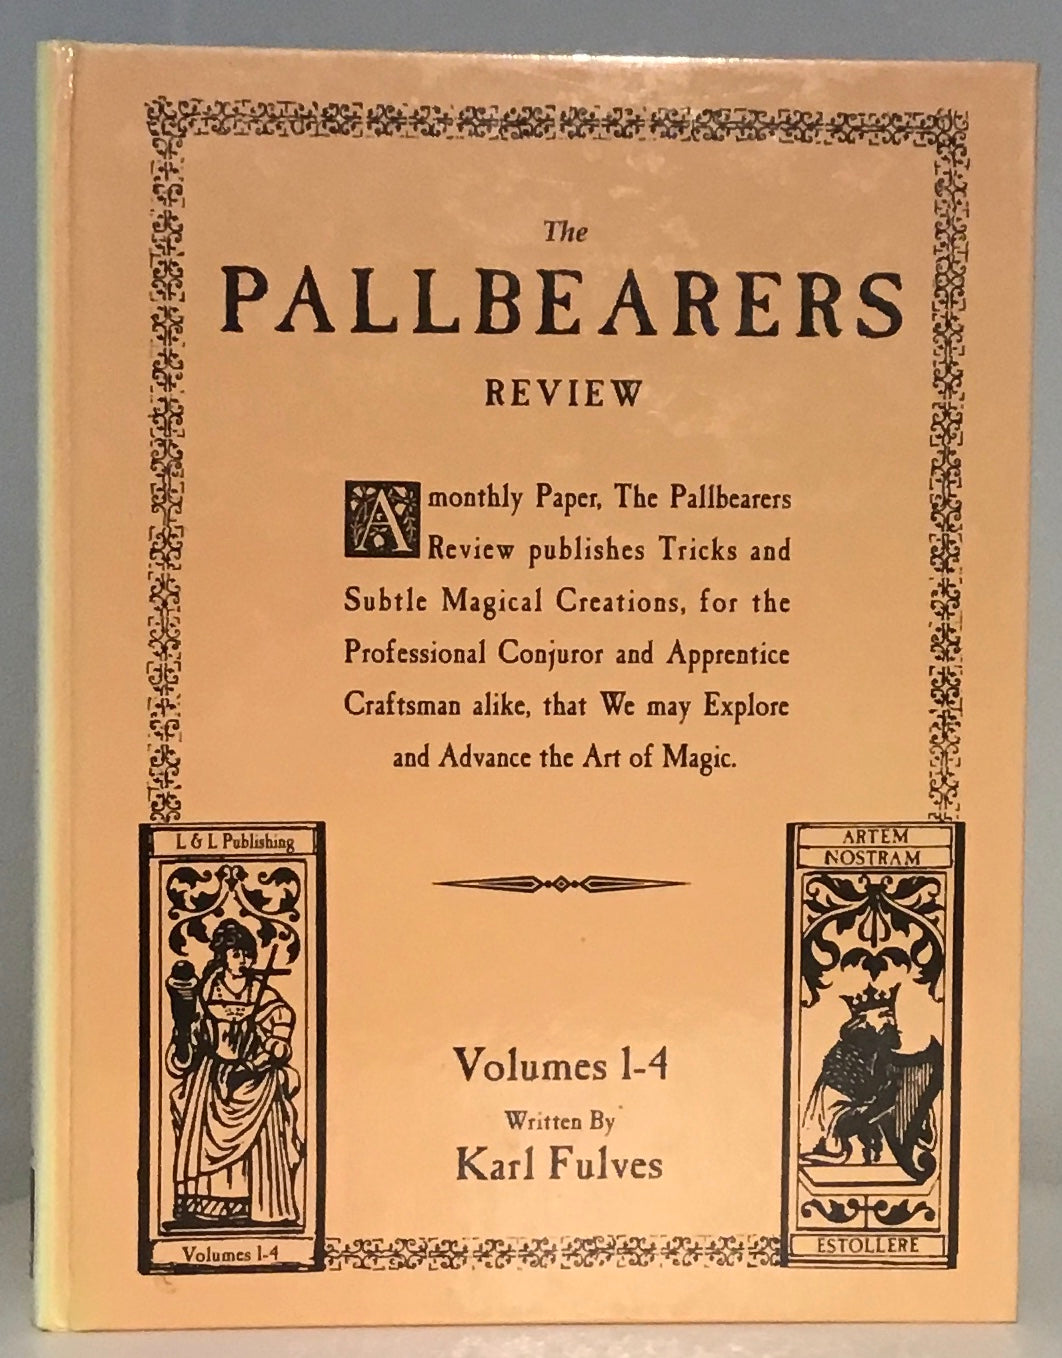 The Pallbearers Review (Volumes 1-4)